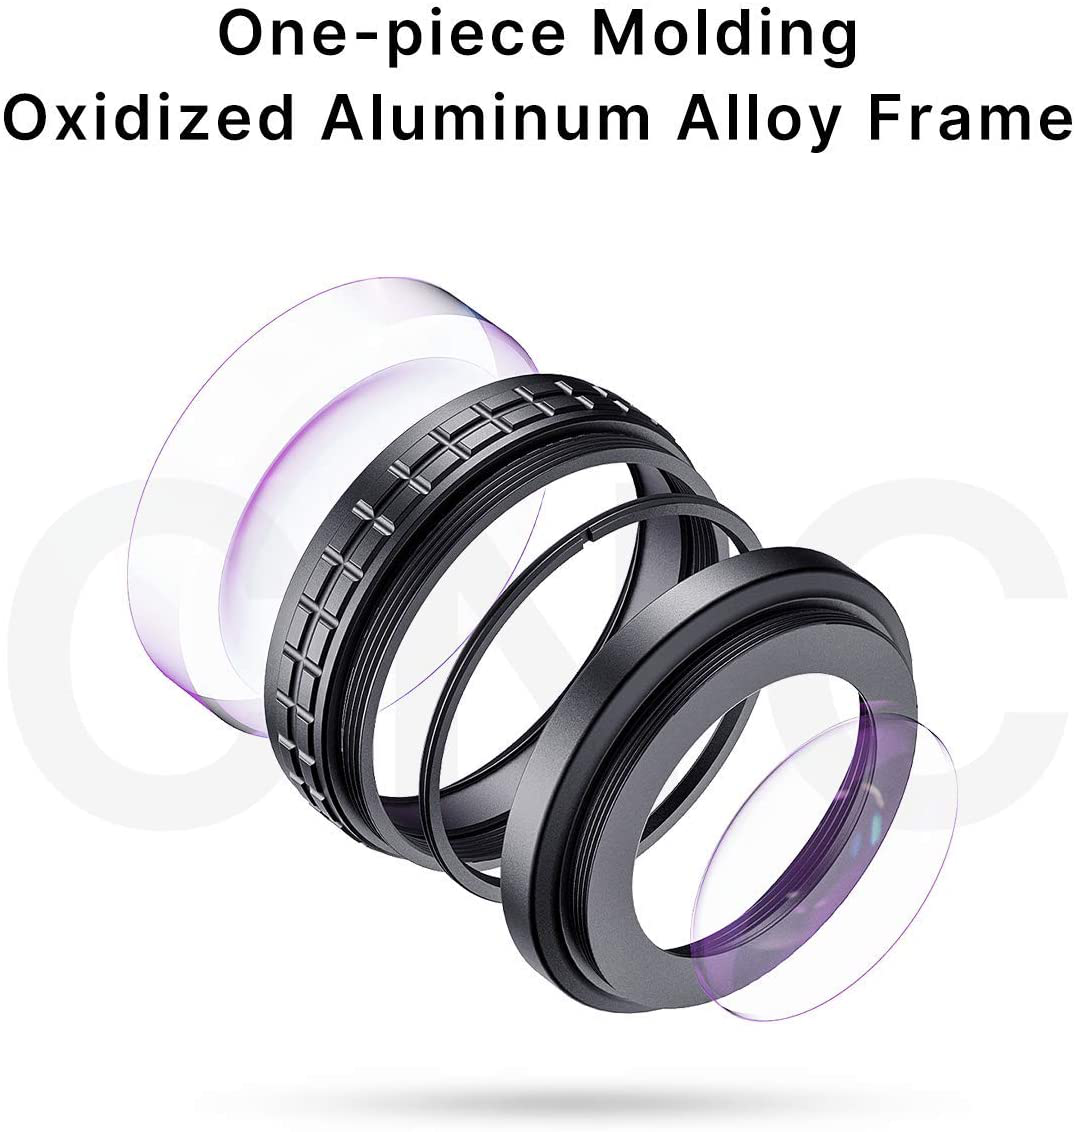 ULANZI Creative ZV-1 Wide Angle/Macro Additional Lens 52mm Diameter Compatible with Sony ZV-1 Camera, 2 in 1 Extra Lens Attachment with Strong Adhesive-Back Adapter Ring Mount, WL-1